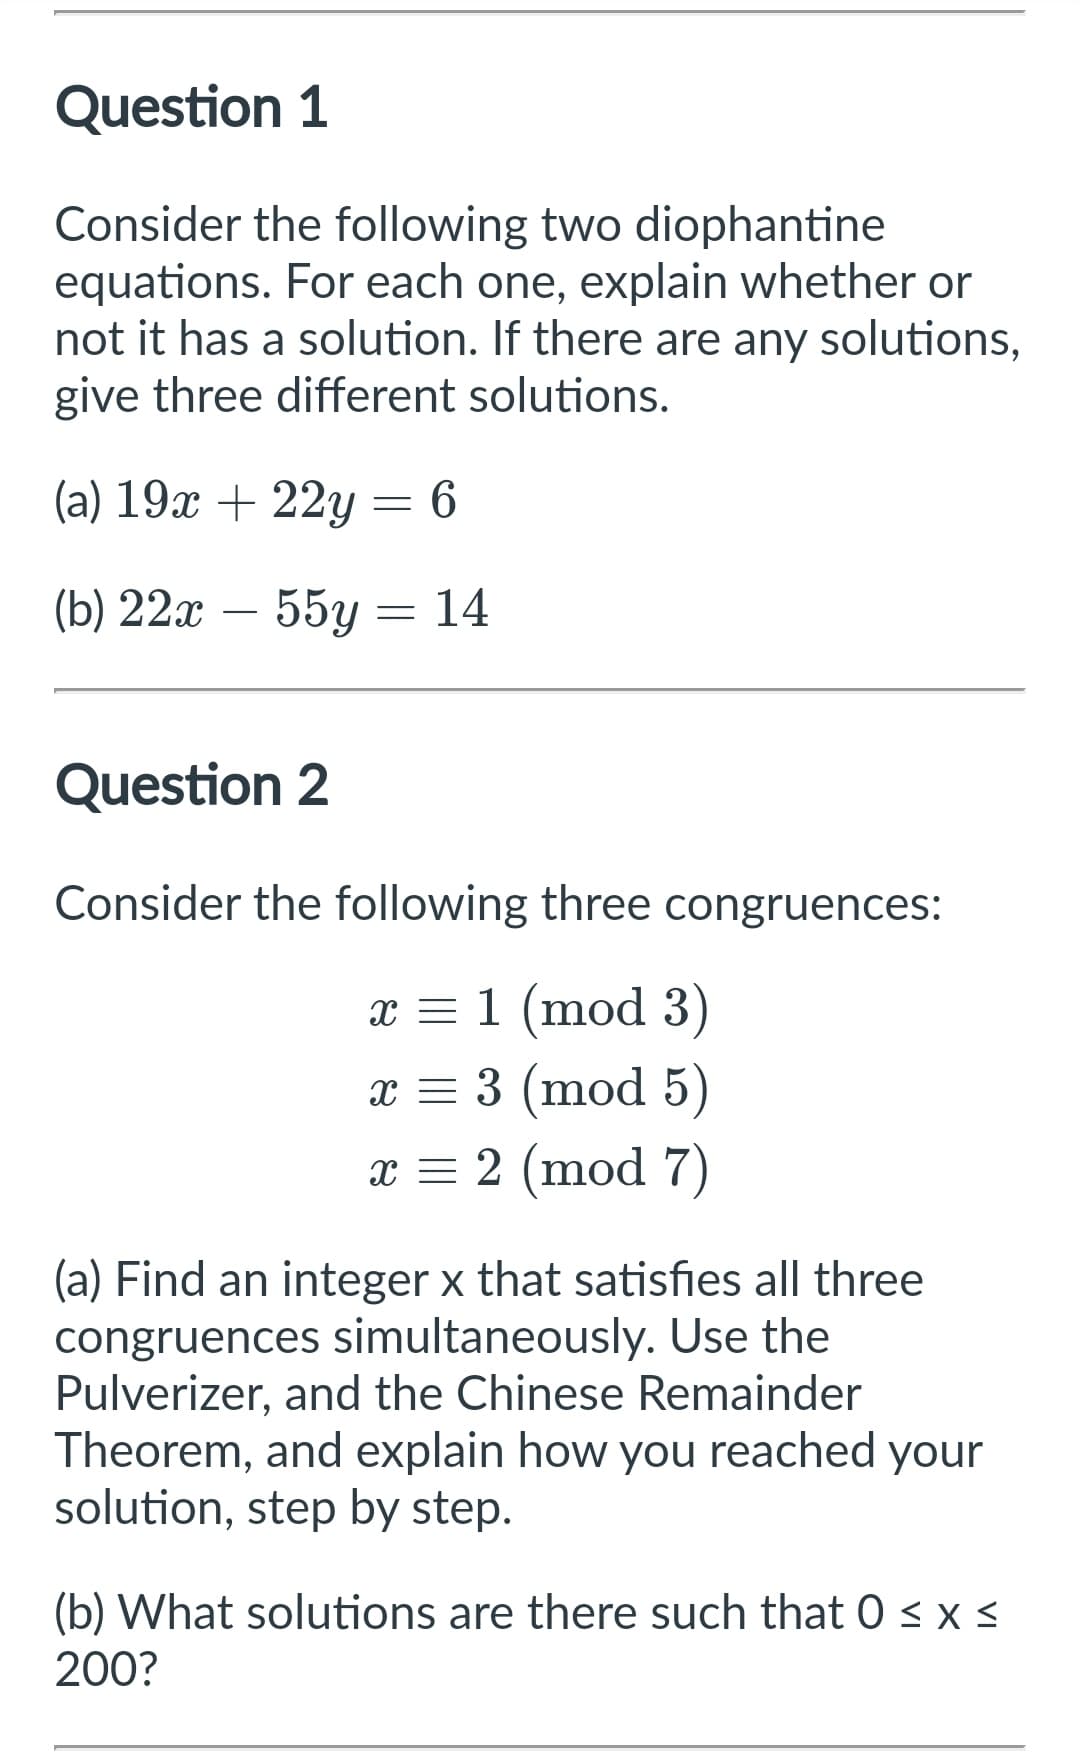 Question 1
Consider the following two diophantine
equations. For each one, explain whether or
not it has a solution. If there are any solutions,
give three different solutions.
(a) 19x + 22y = 6
(b) 22x - 55y
14
=
Question 2
Consider the following three congruences:
x = 1 (mod 3)
x = 3 (mod 5)
x = 2 (mod 7)
(a) Find an integer x that satisfies all three
congruences simultaneously. Use the
Pulverizer, and the Chinese Remainder
Theorem, and explain how you reached your
solution, step by step.
(b) What solutions are there such that 0 ≤ x ≤
200?